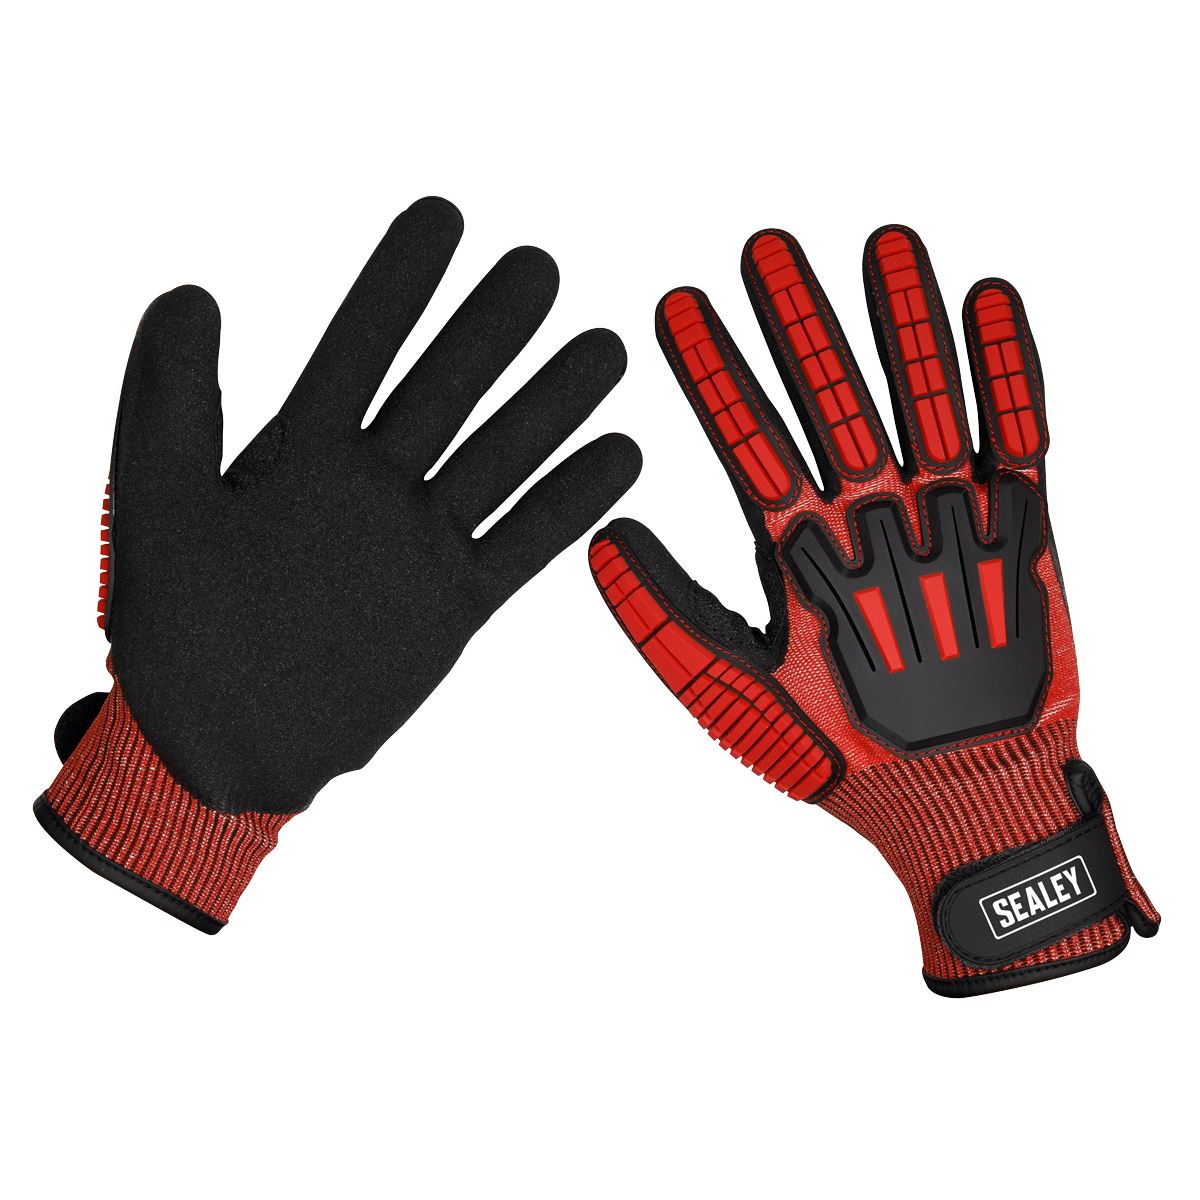 Sealey Cut & Impact Resistant Gloves - Large - Pair